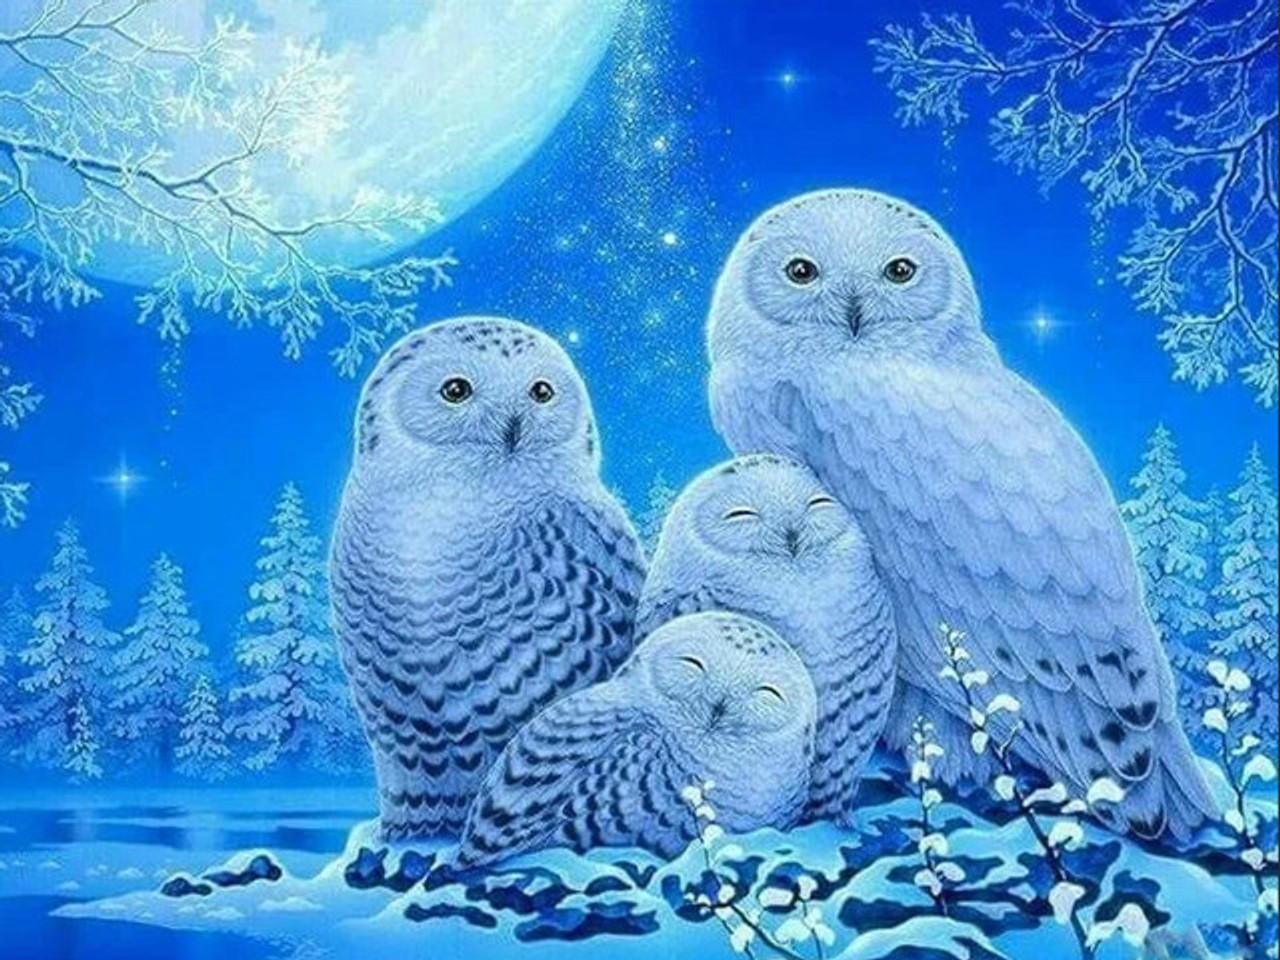  5D Diamond Painting Kits for Adults Snowy Owl Full